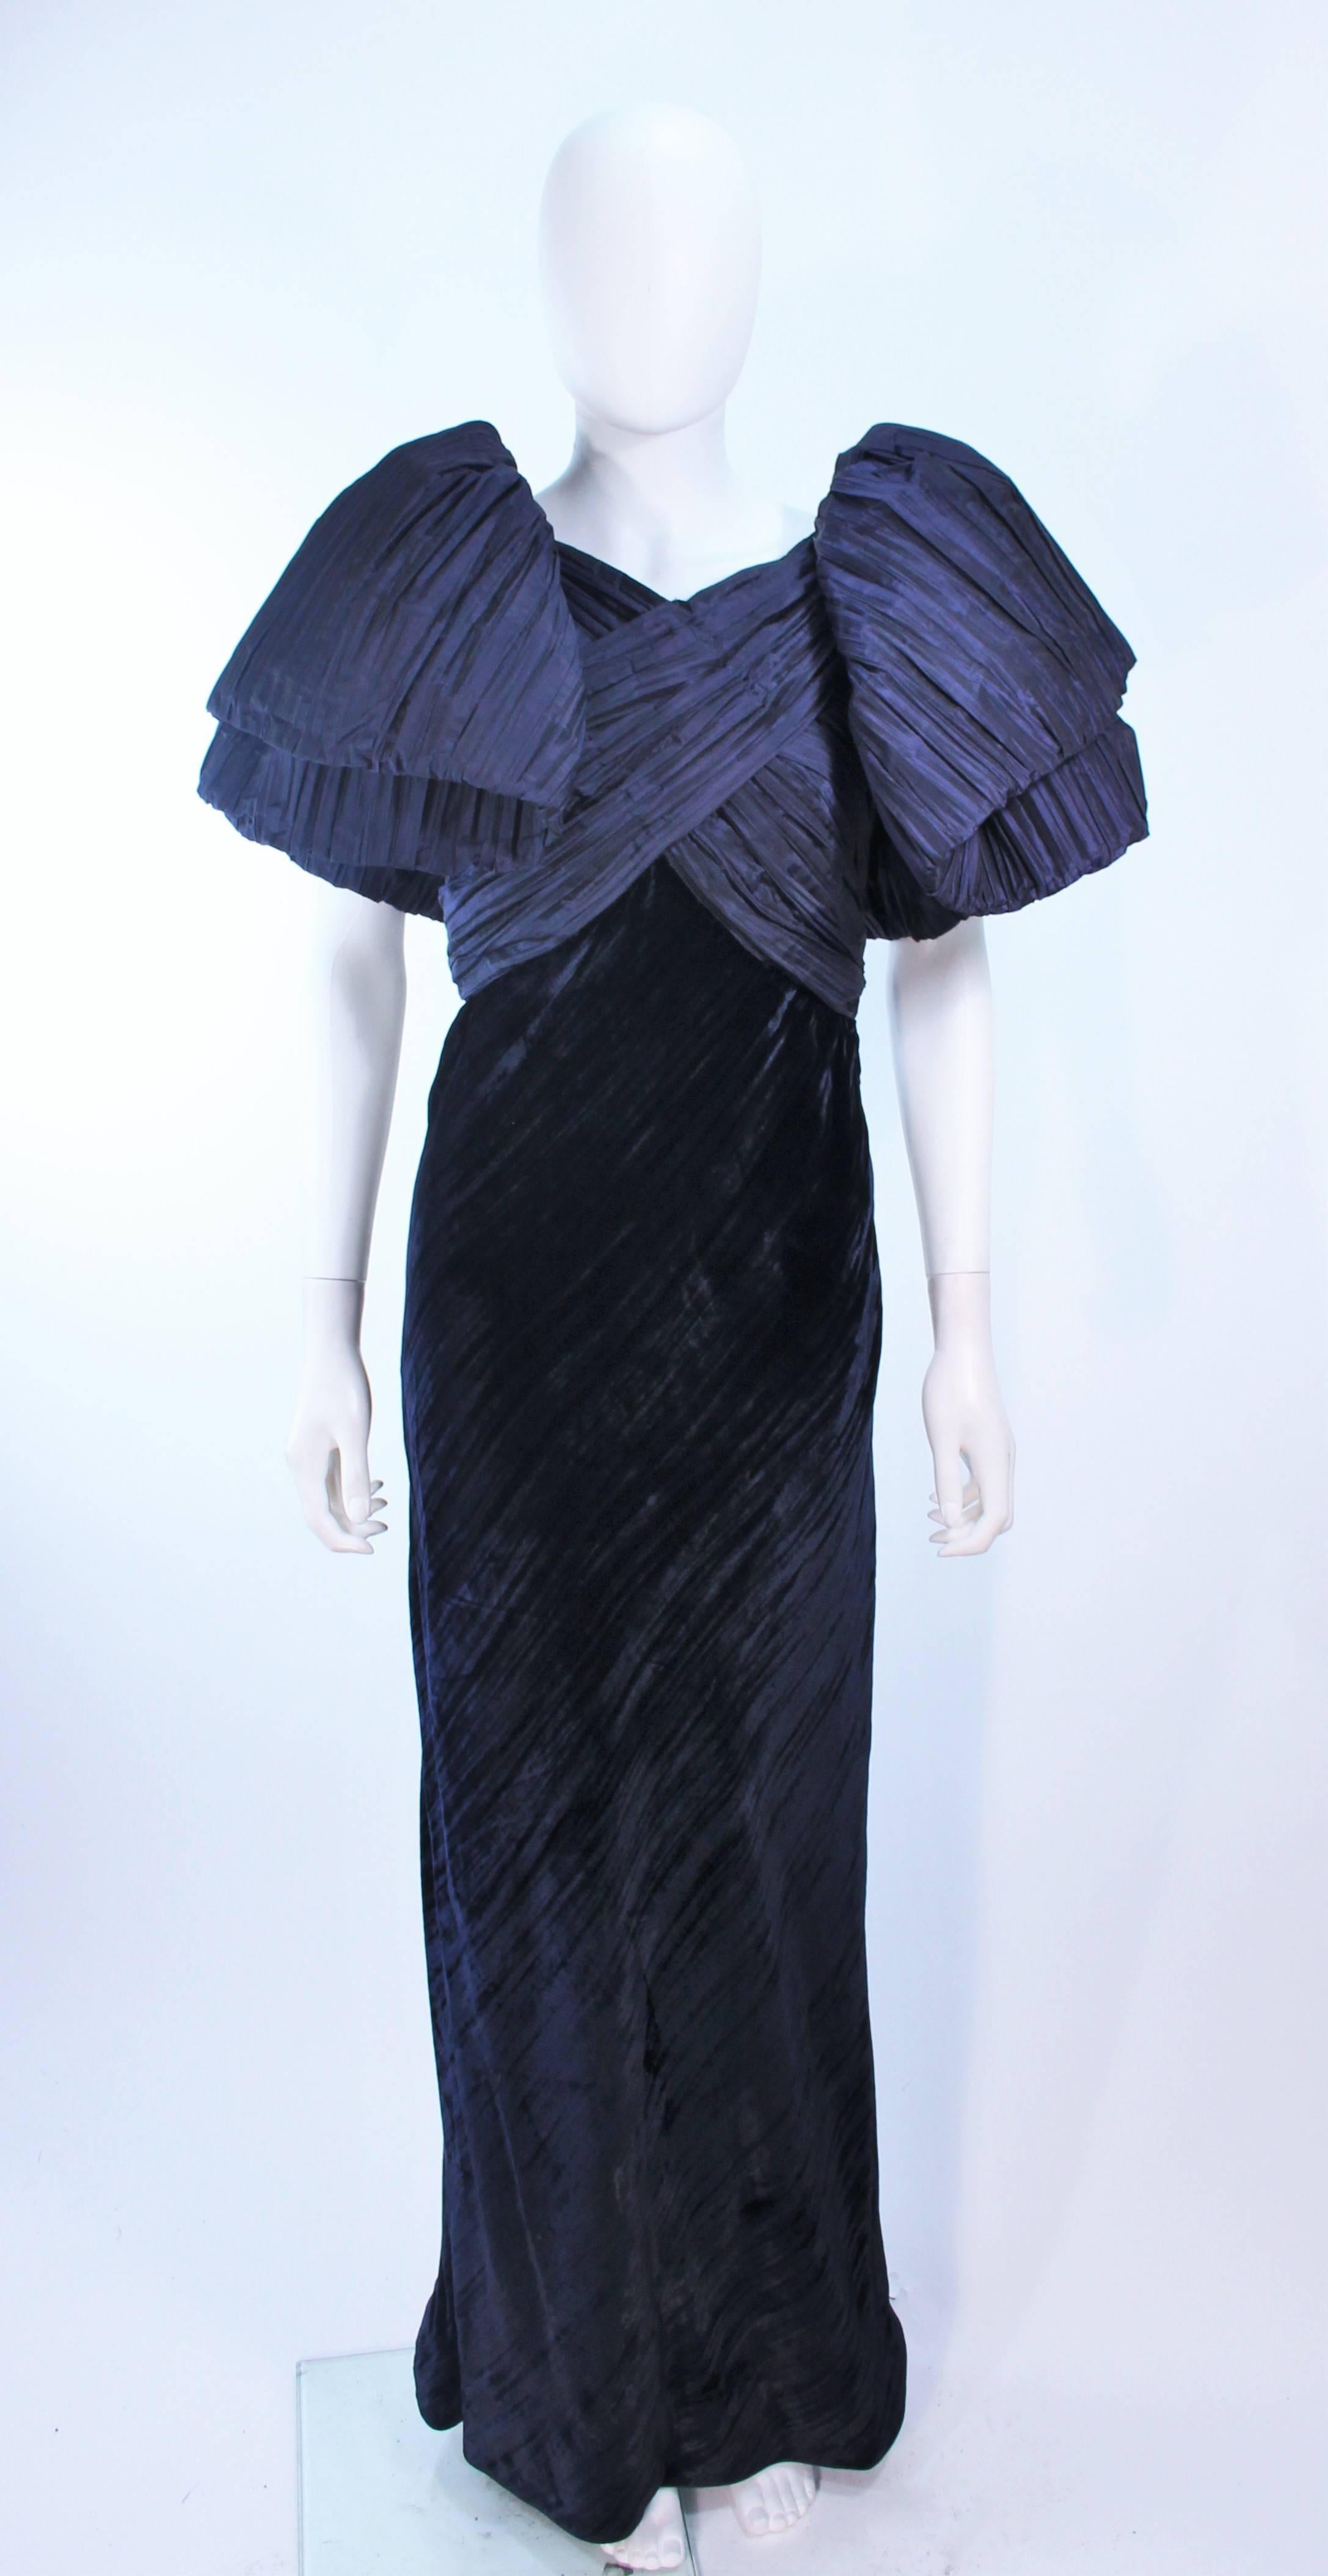 Women's JACQUELINE DE RIBES Gown Navy Bias Velvet and Pleated Bodice Size 6 8